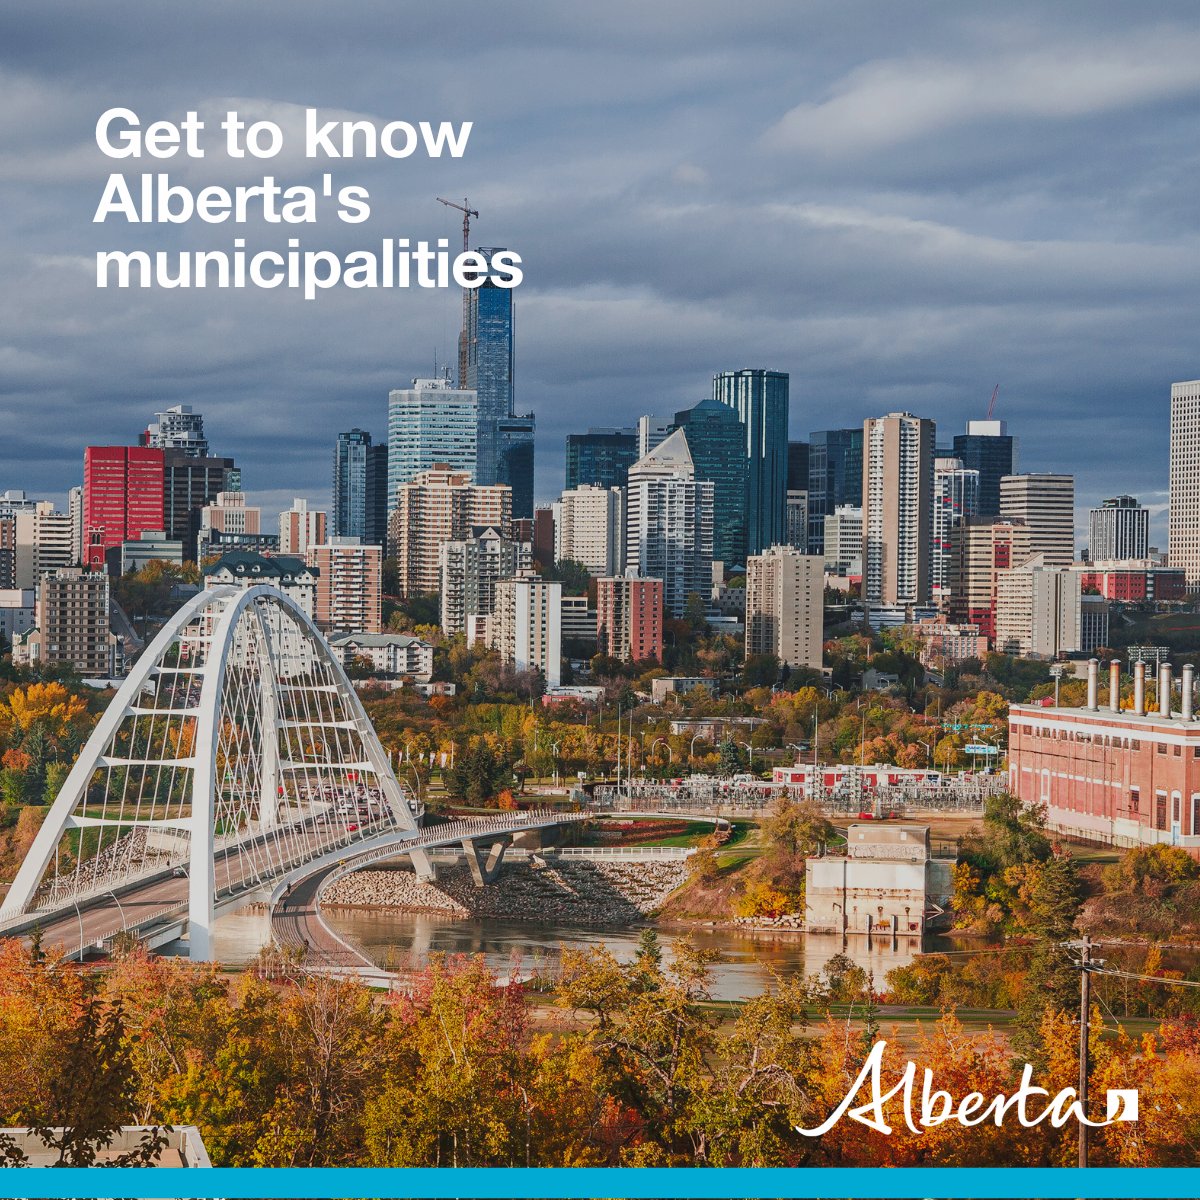 DYK: There are 19 municipalities in Alberta that have been granted city status. To qualify as a city, there must be a population size of over 10,000 people. Learn more about Alberta’s municipalities here: alberta.ca/about-municipa…